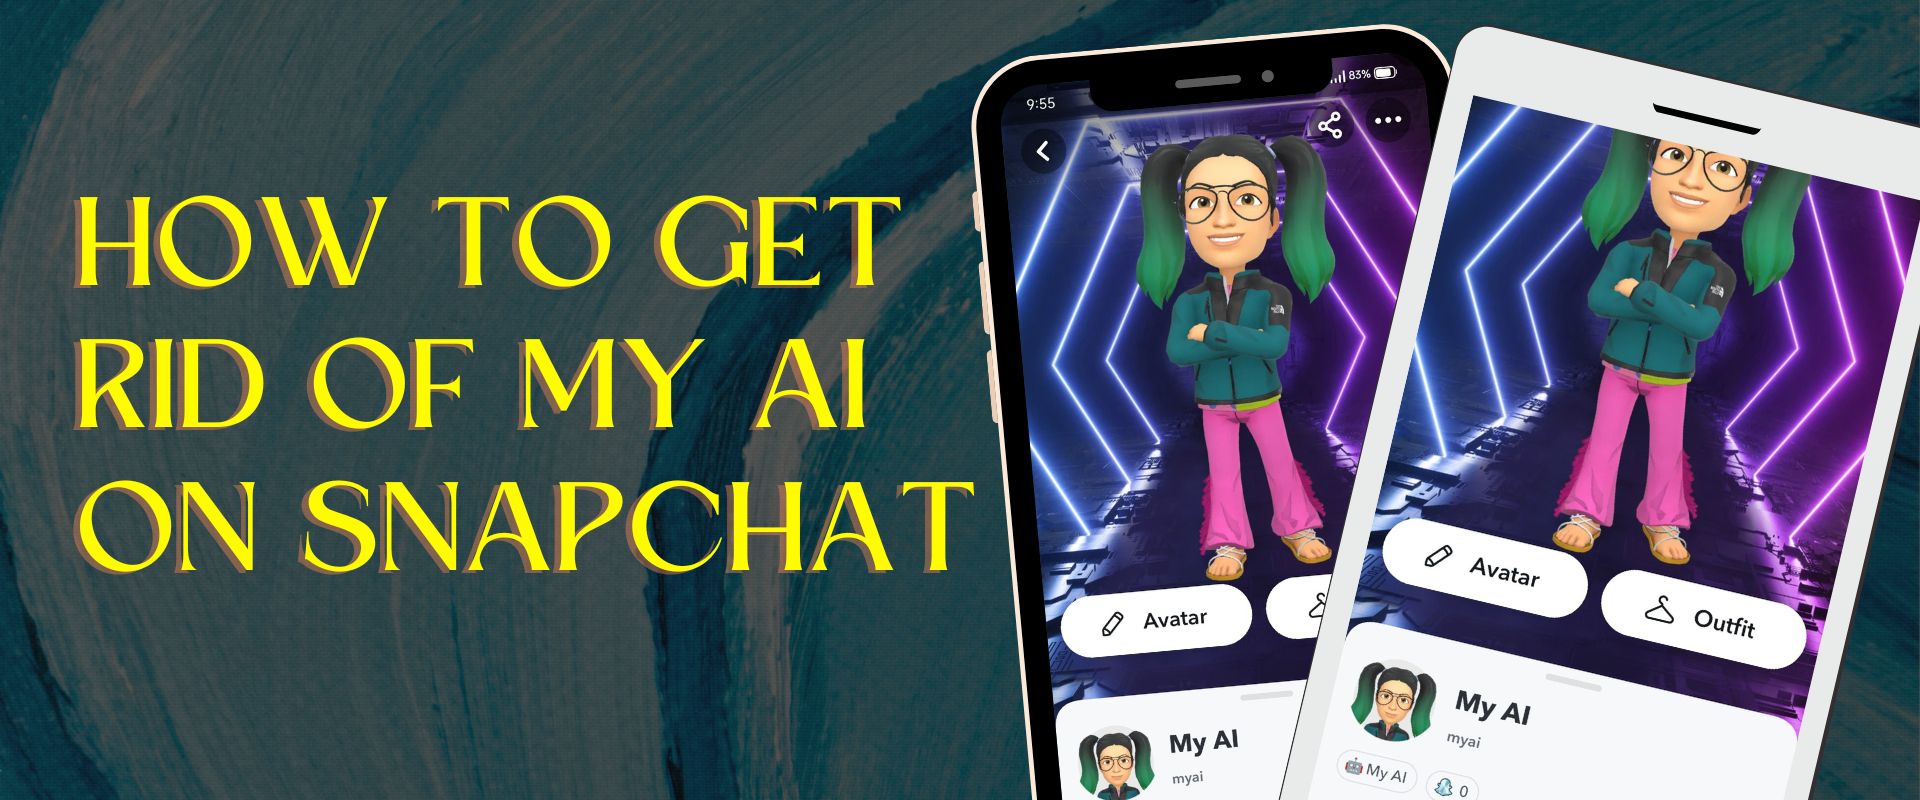 How to Get Rid of My AI on Snapchat for Android & iPhone Devices